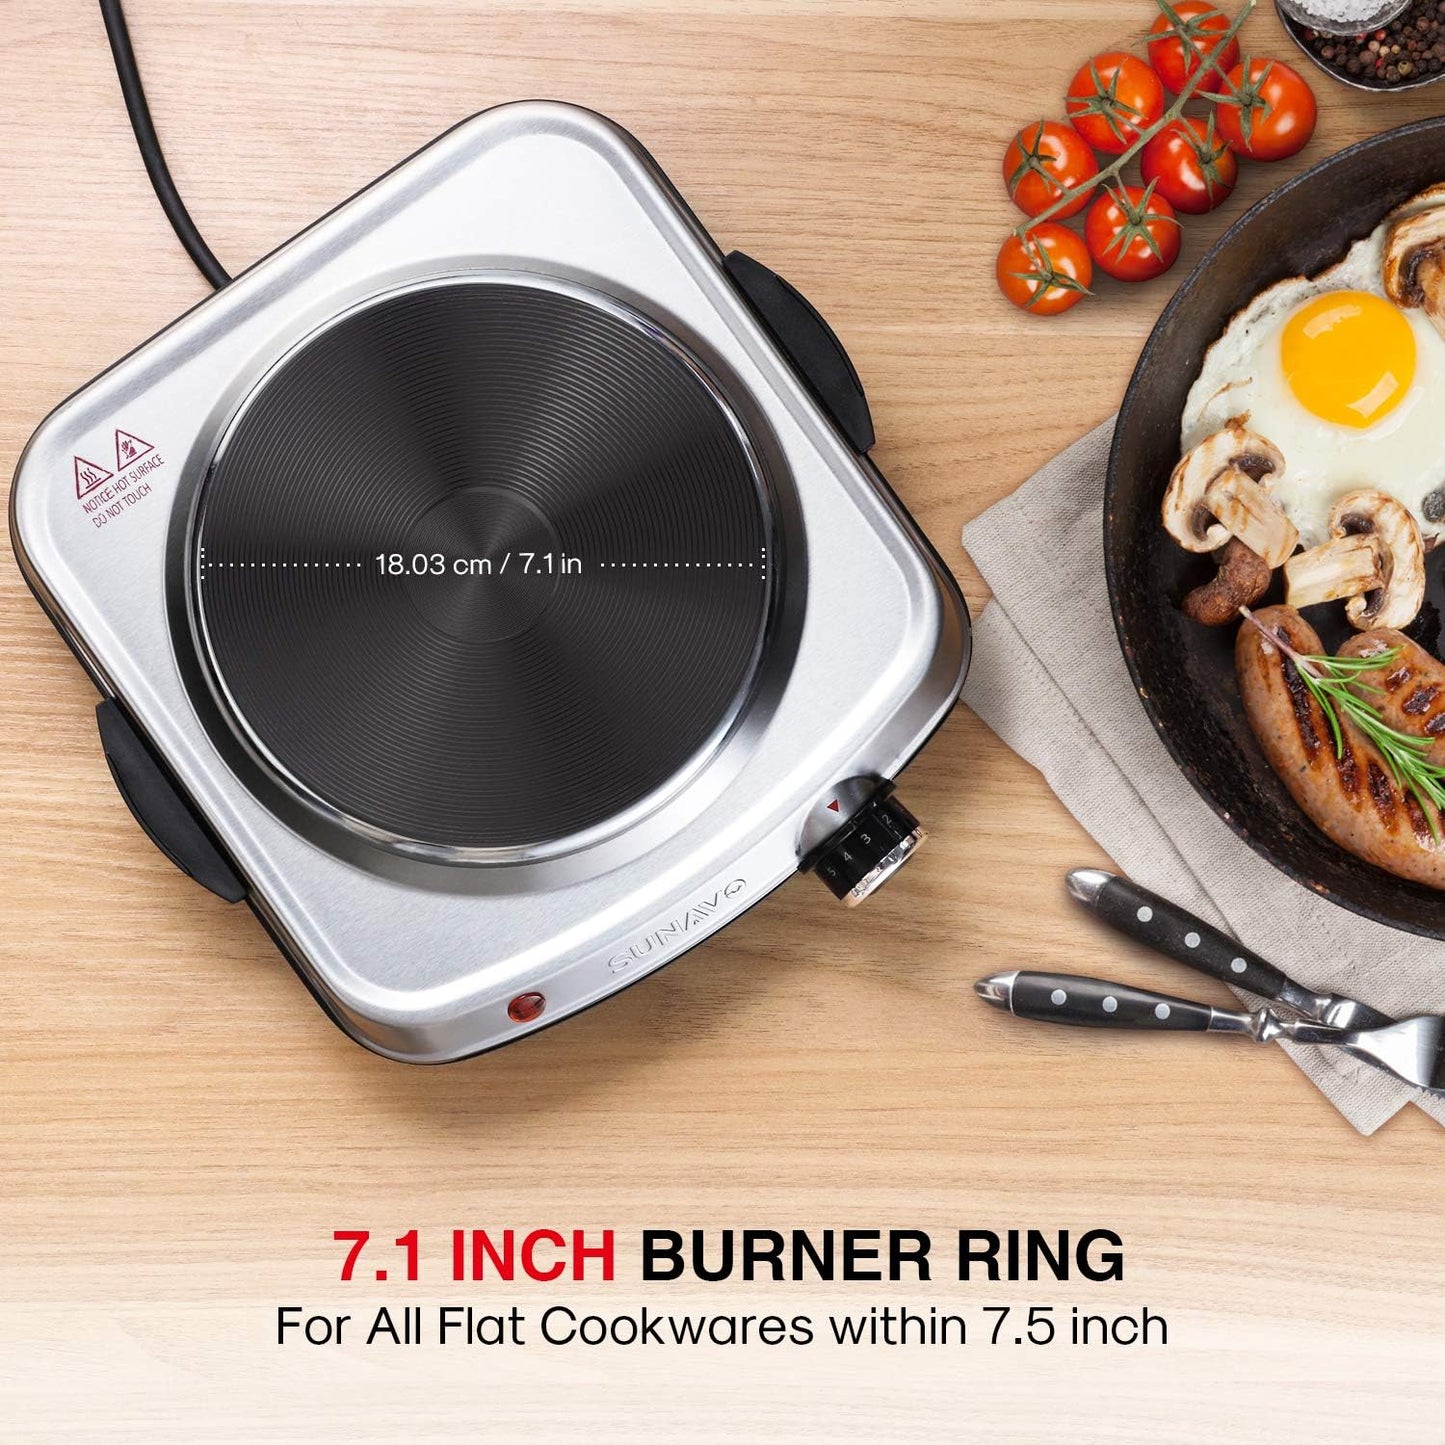 1500W Hot Plates for Cooking, Electric Single Burner with Handles, 6 Power Levels Stainless Steel Hot Plate for Kitchen Camping RV and More Silver